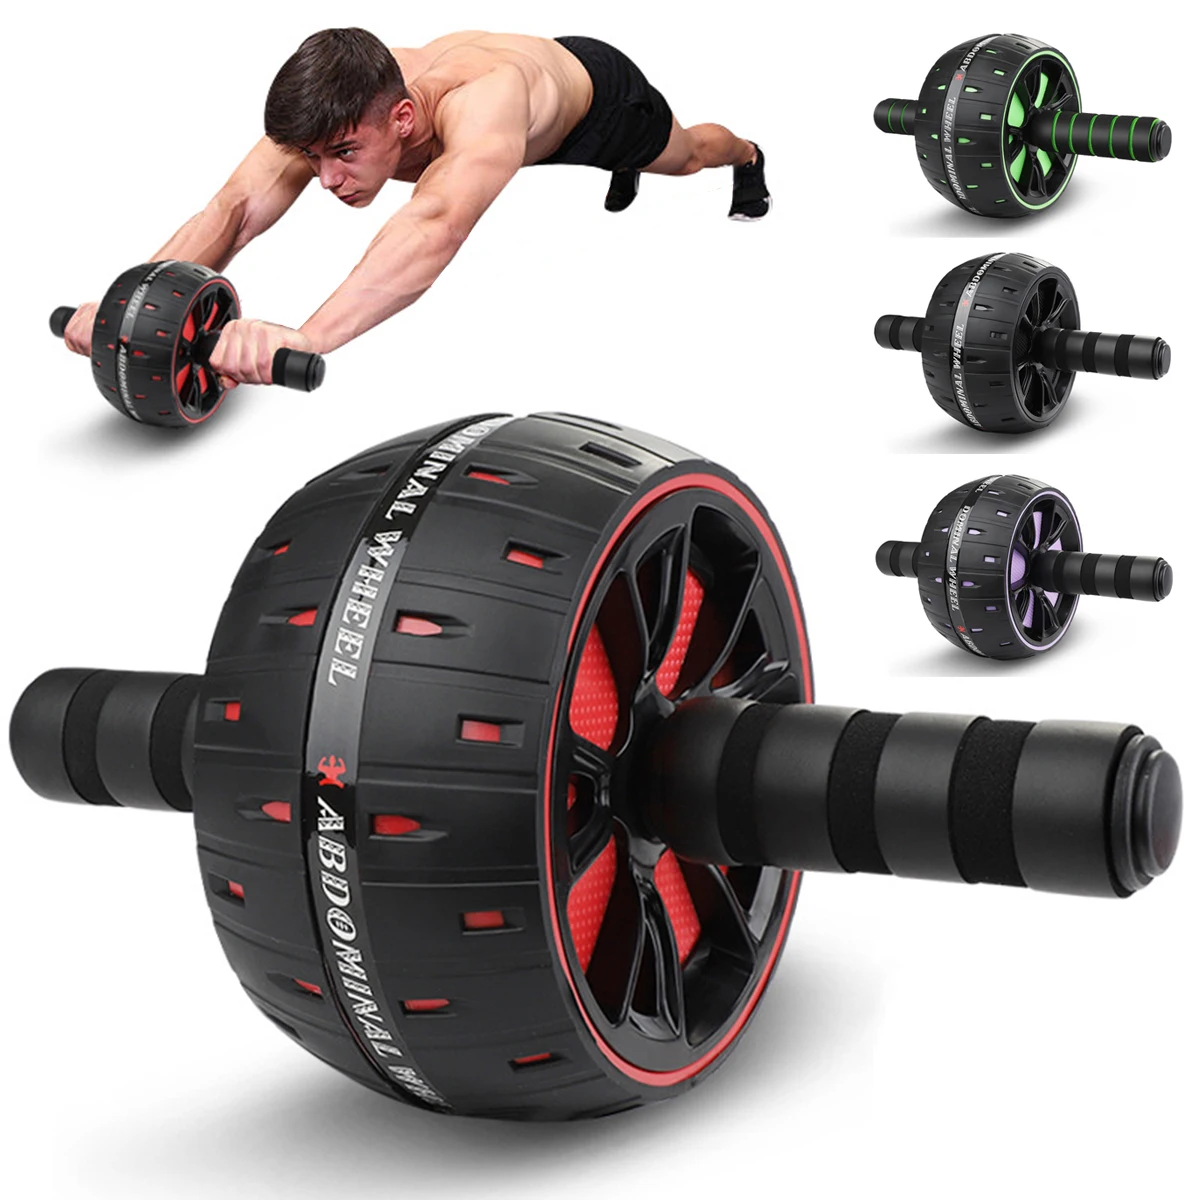 Abdominal Exercise Exercise Roller Automatic Telescopic Abdominal Exercise Equipment Abdominal Muscle Fitness Training Belly Wheel Mute Single Wheel Suitable for Home Gym Abdominal Roller 